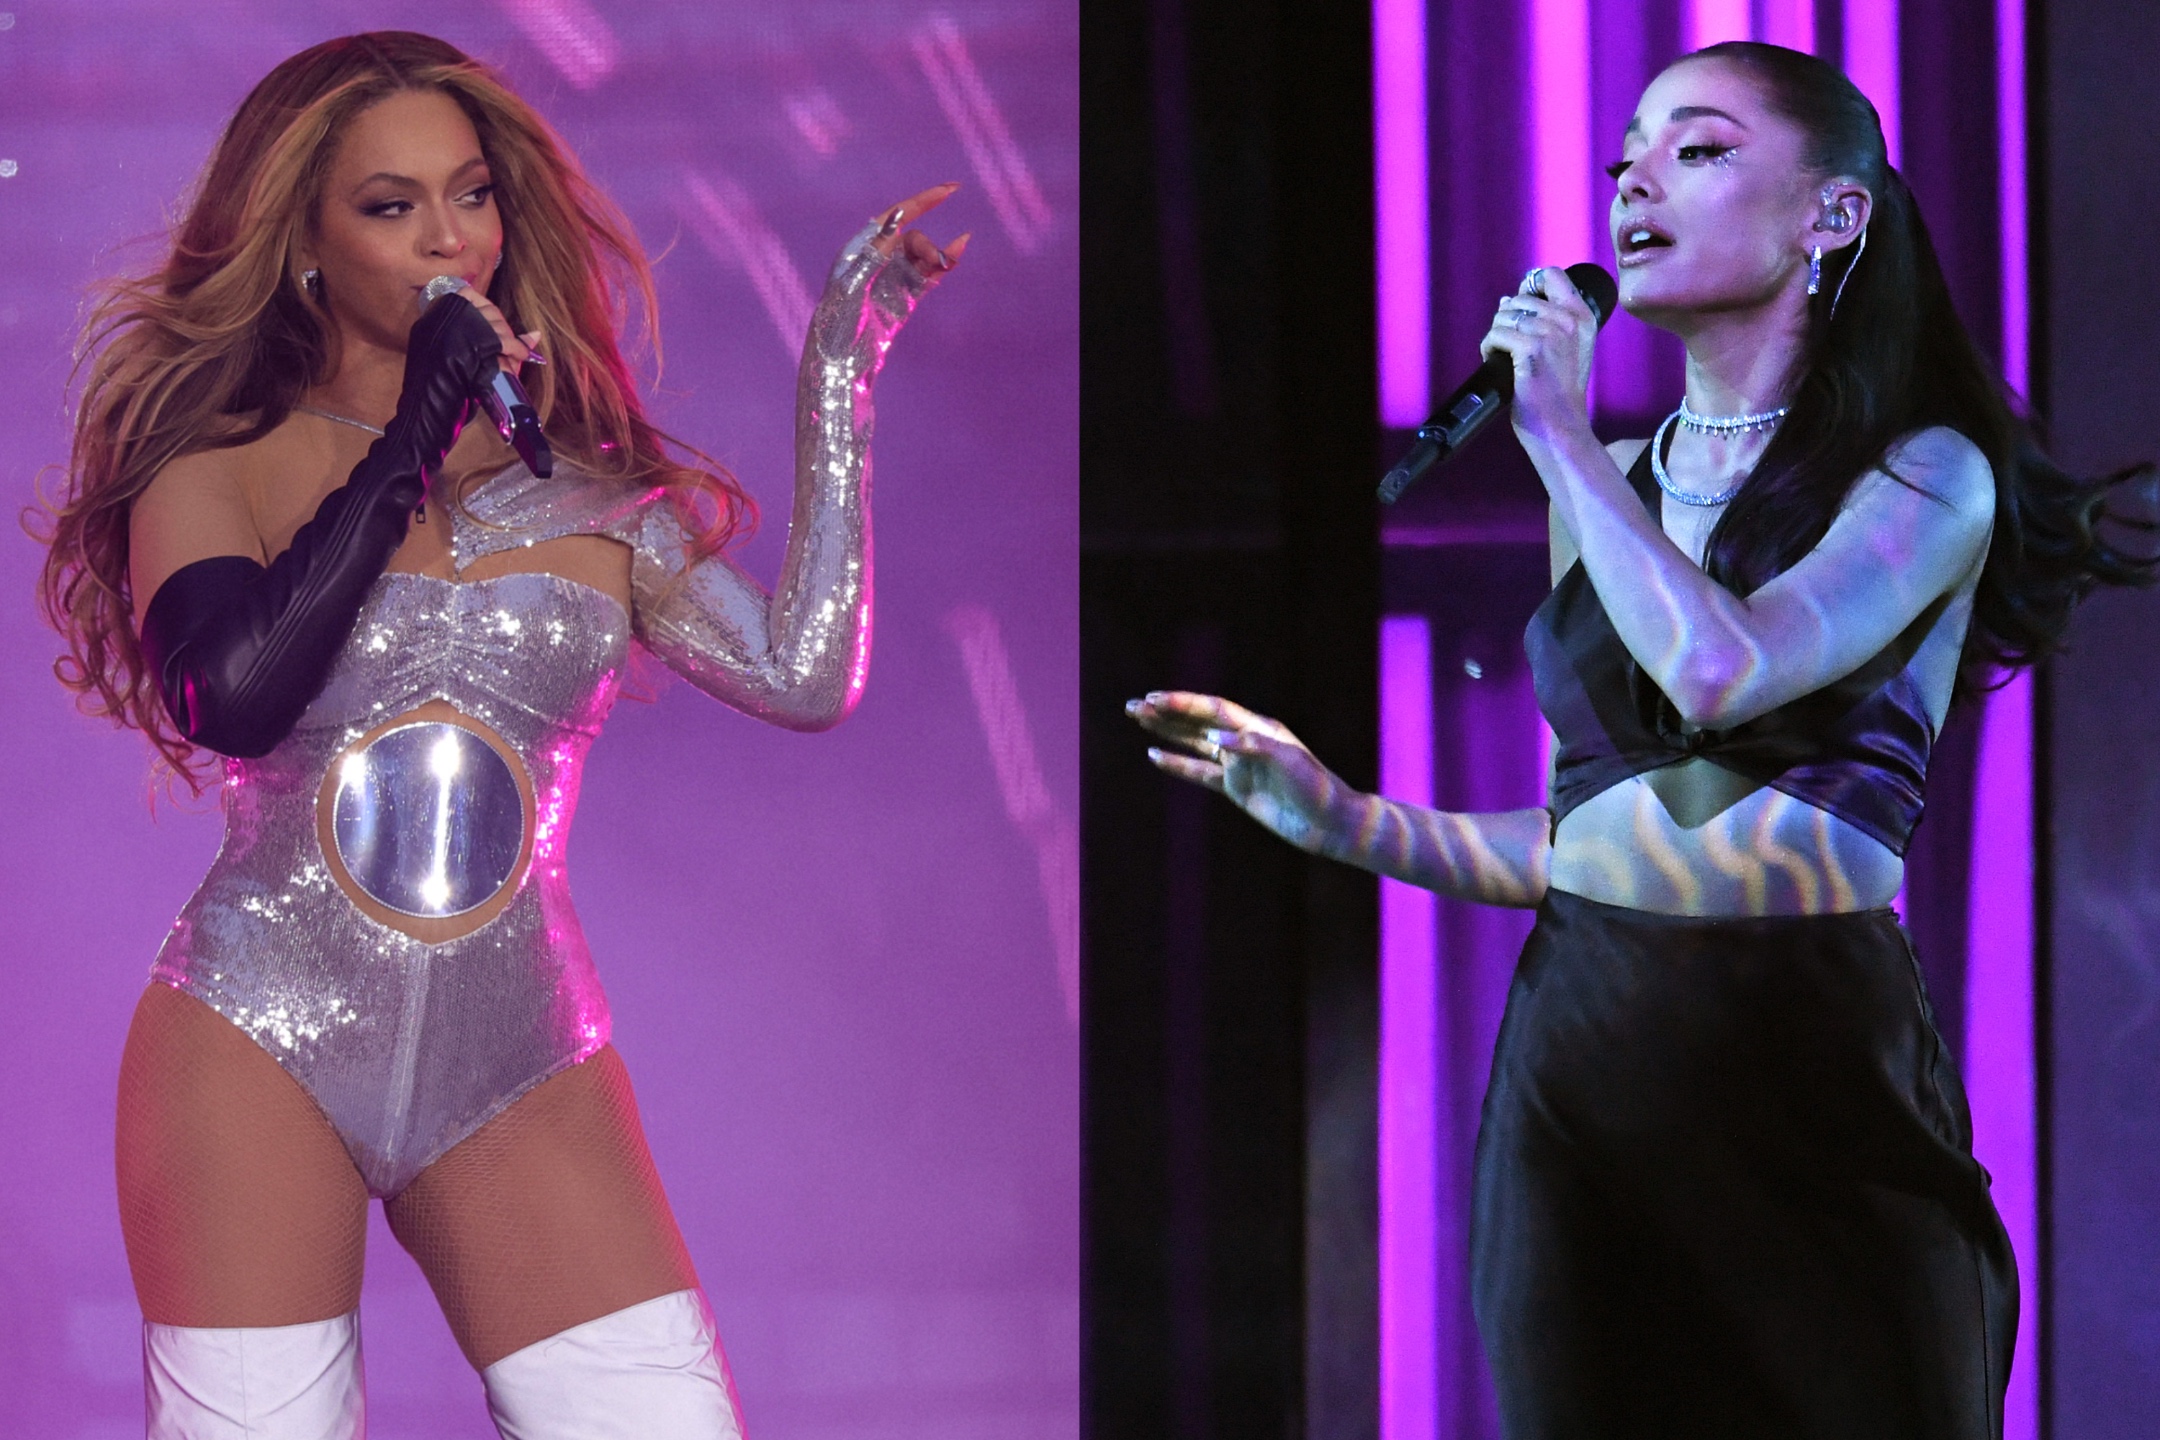 Ariana Grande Attends “Renaissance” Tour In London Amid Beyonce Collab Rumors